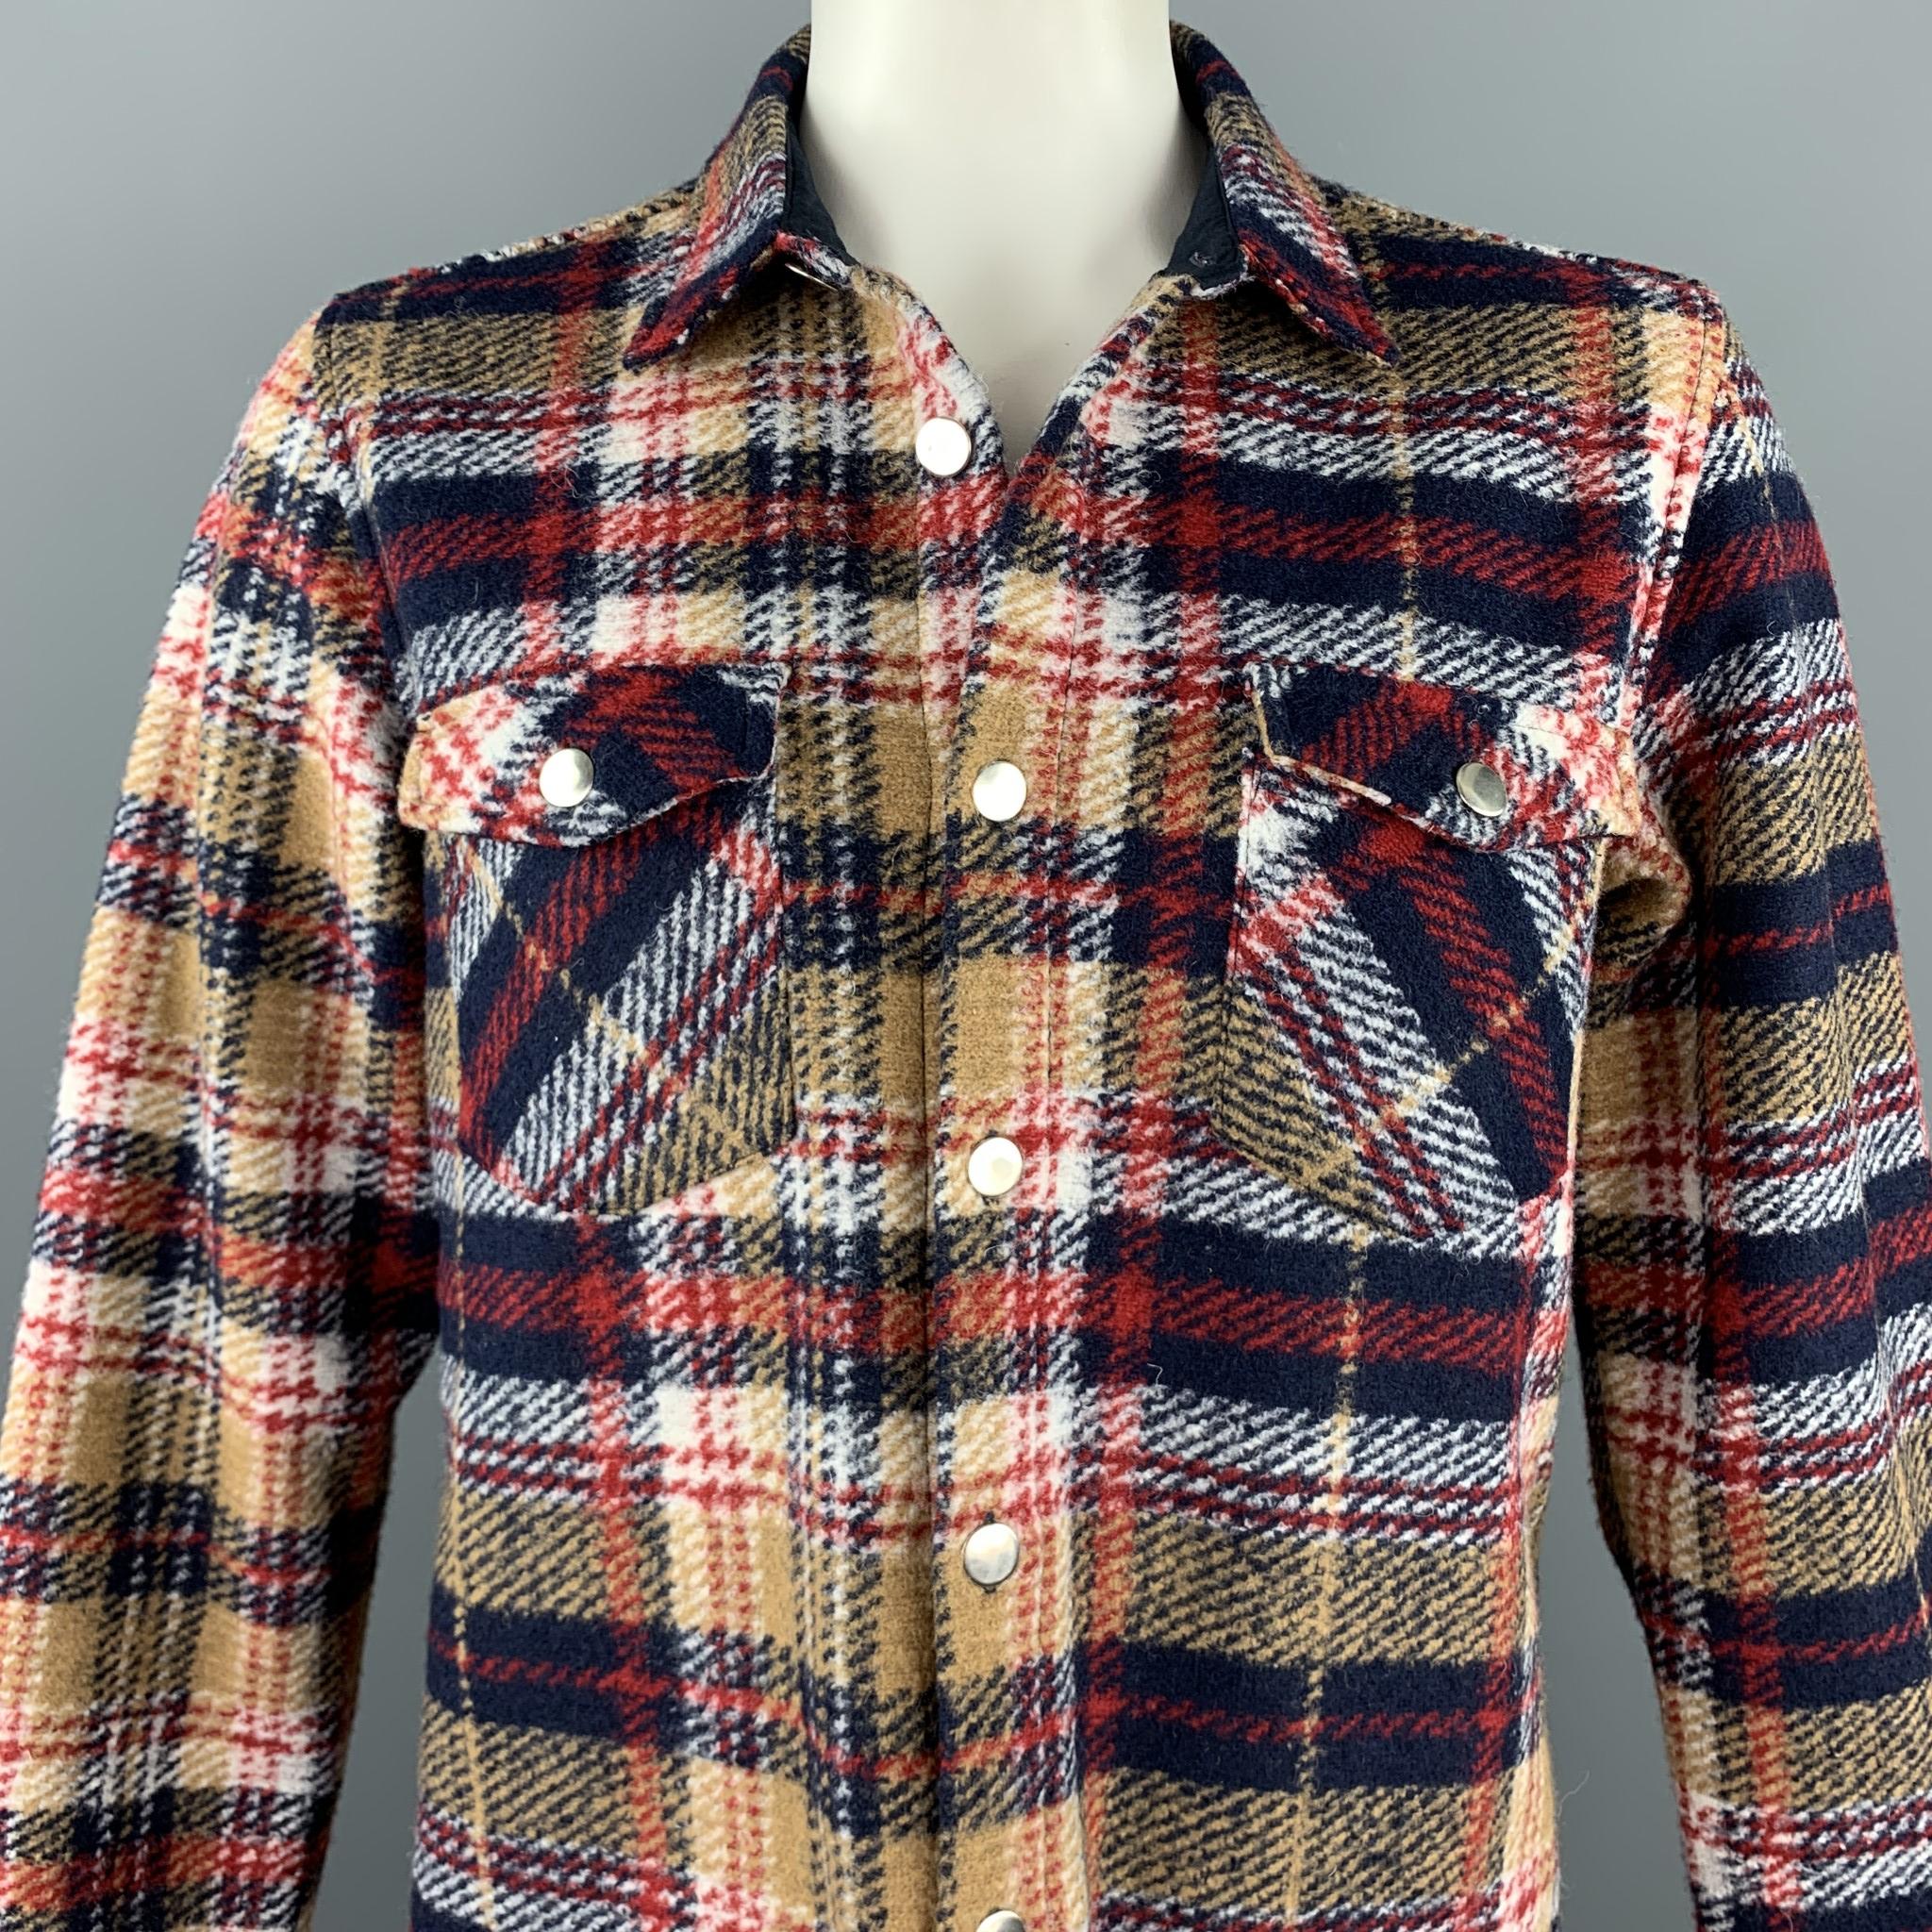 DSQUARED2 long sleeve shirt comes in a navy & tan plaid wool featuring a jacket style, silver tone buttons, patch pockets, and a spread collar. Made in Italy.

Excellent Pre-Owned Condition.
Marked: L

Measurements:

Shoulder: 18.5 in. 
Chest: 42